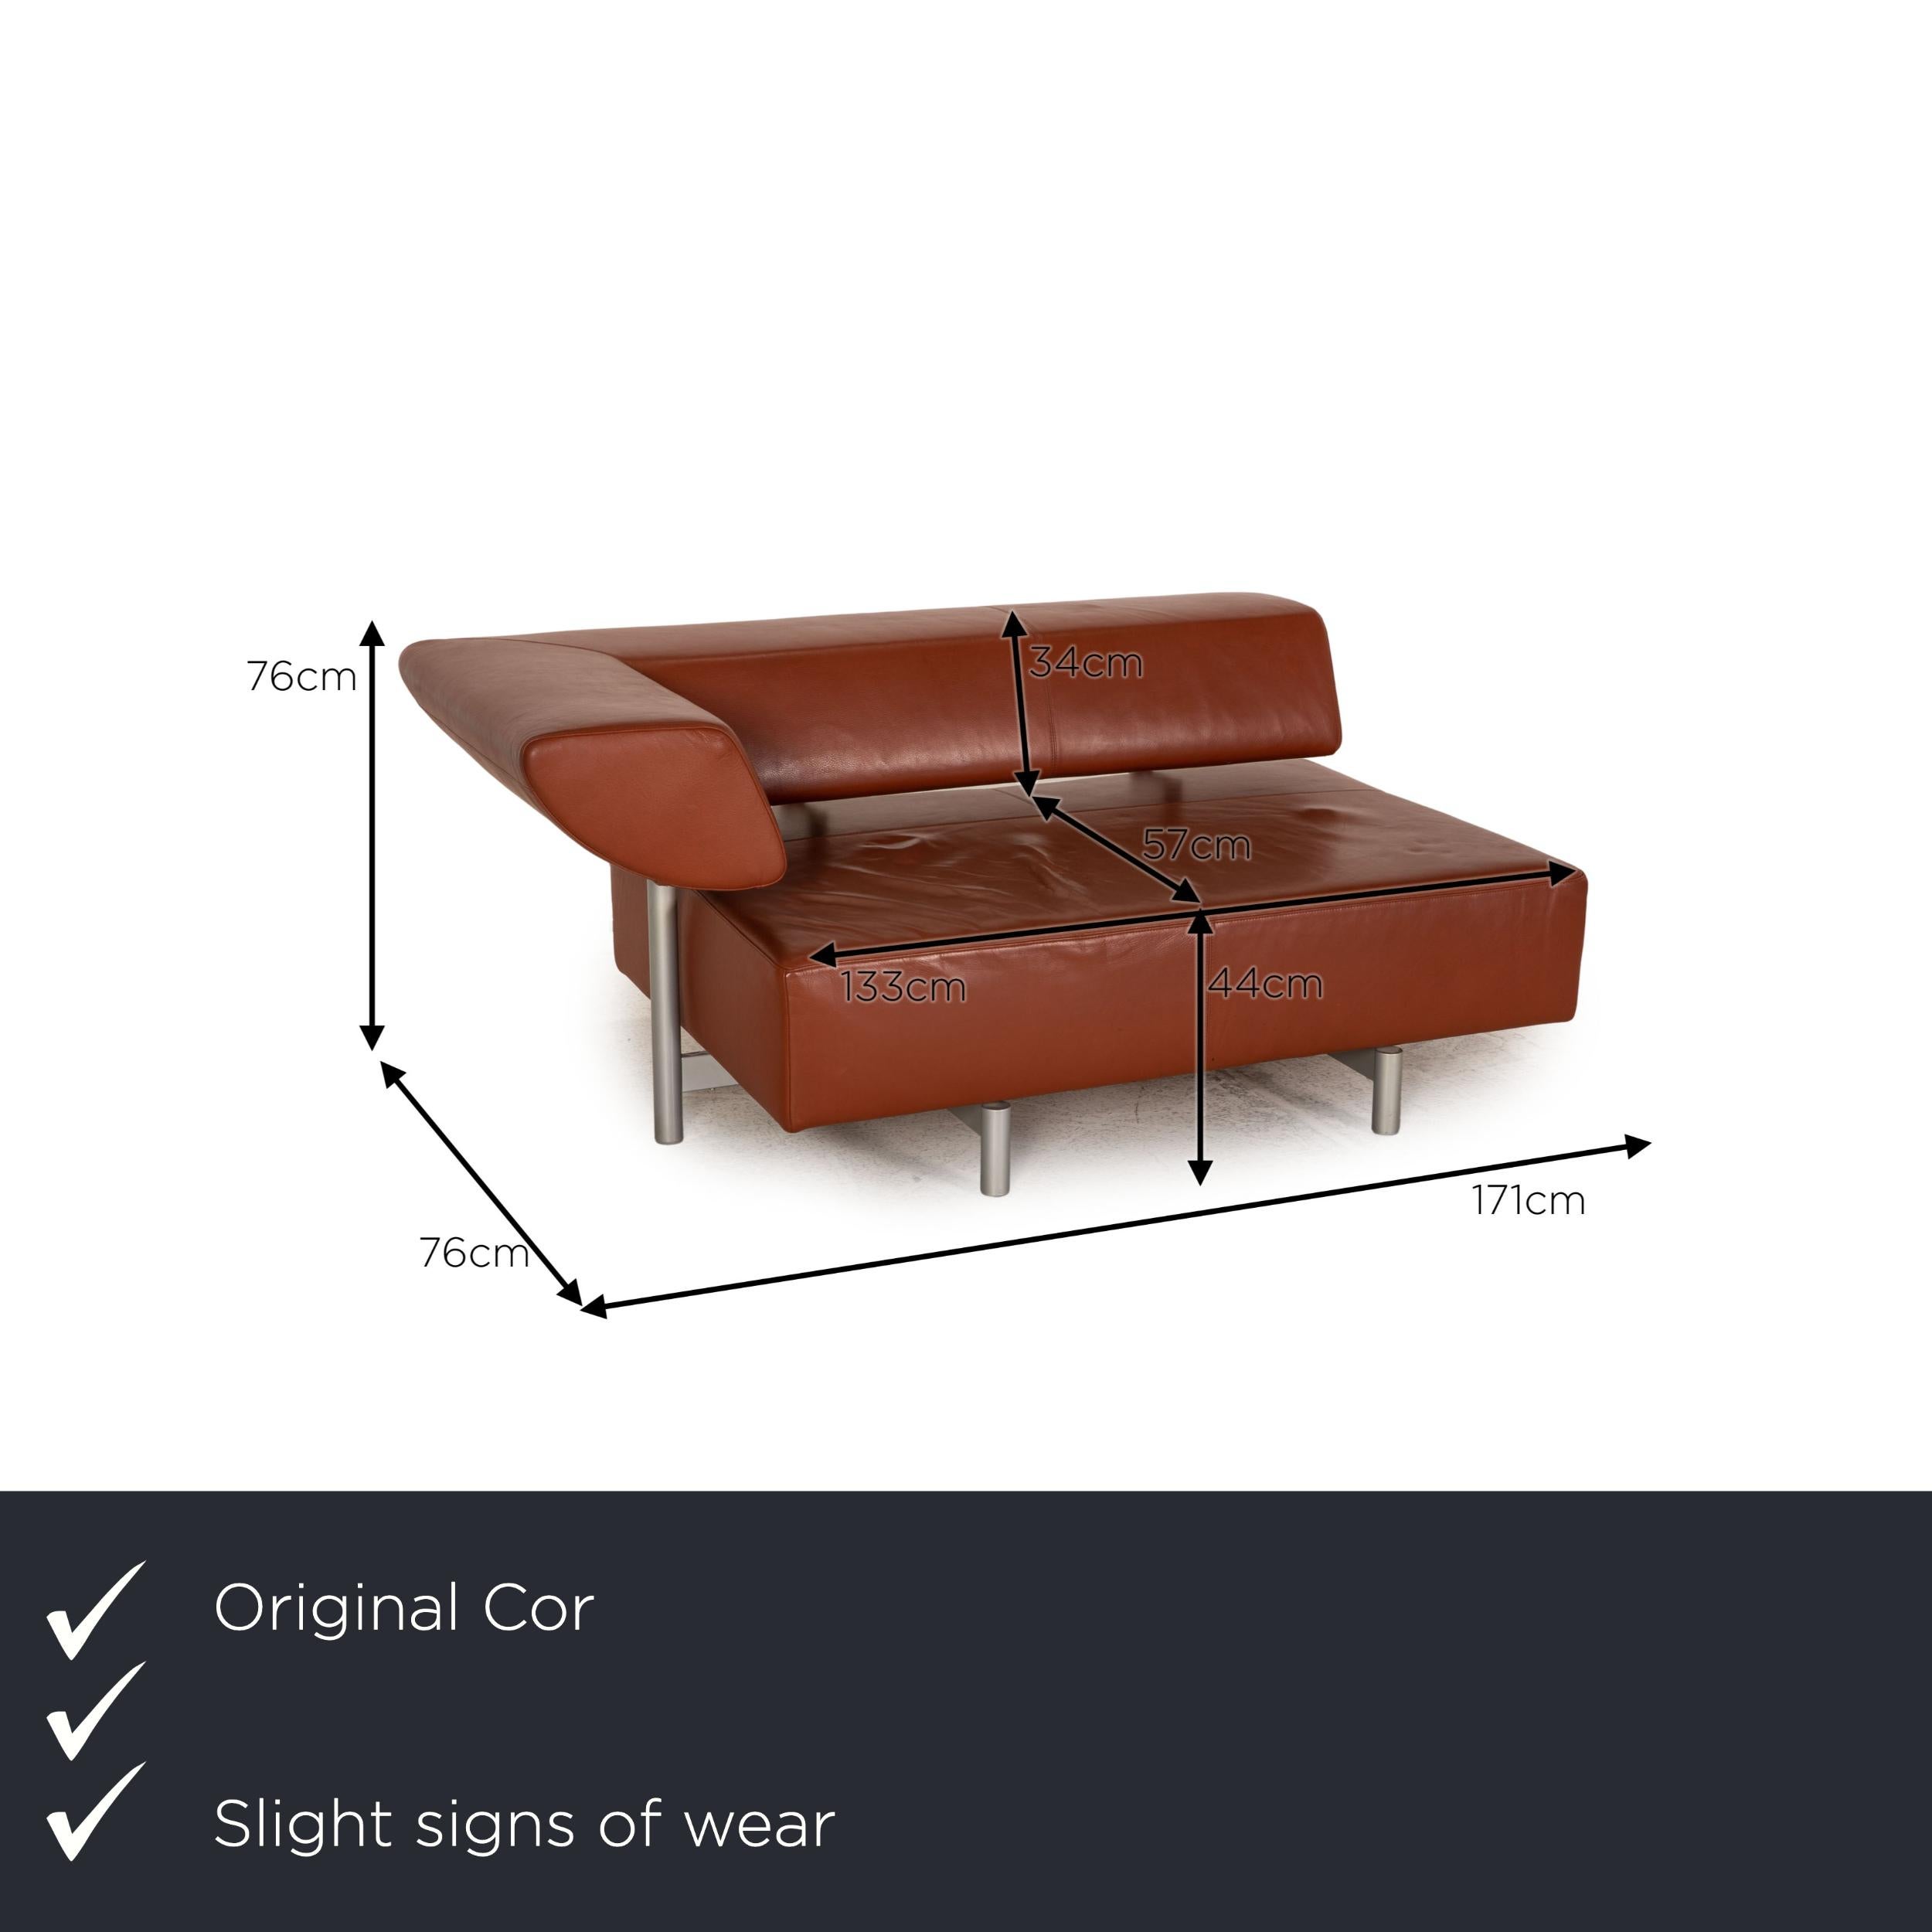 We present to you a Cor Arthe leather sofa brown two-seater couch.

Product measurements in centimeters:

depth: 96
width: 171
height: 76
seat height: 44
rest height: 76
seat depth: 57
seat width: 133
back height: 34.

 